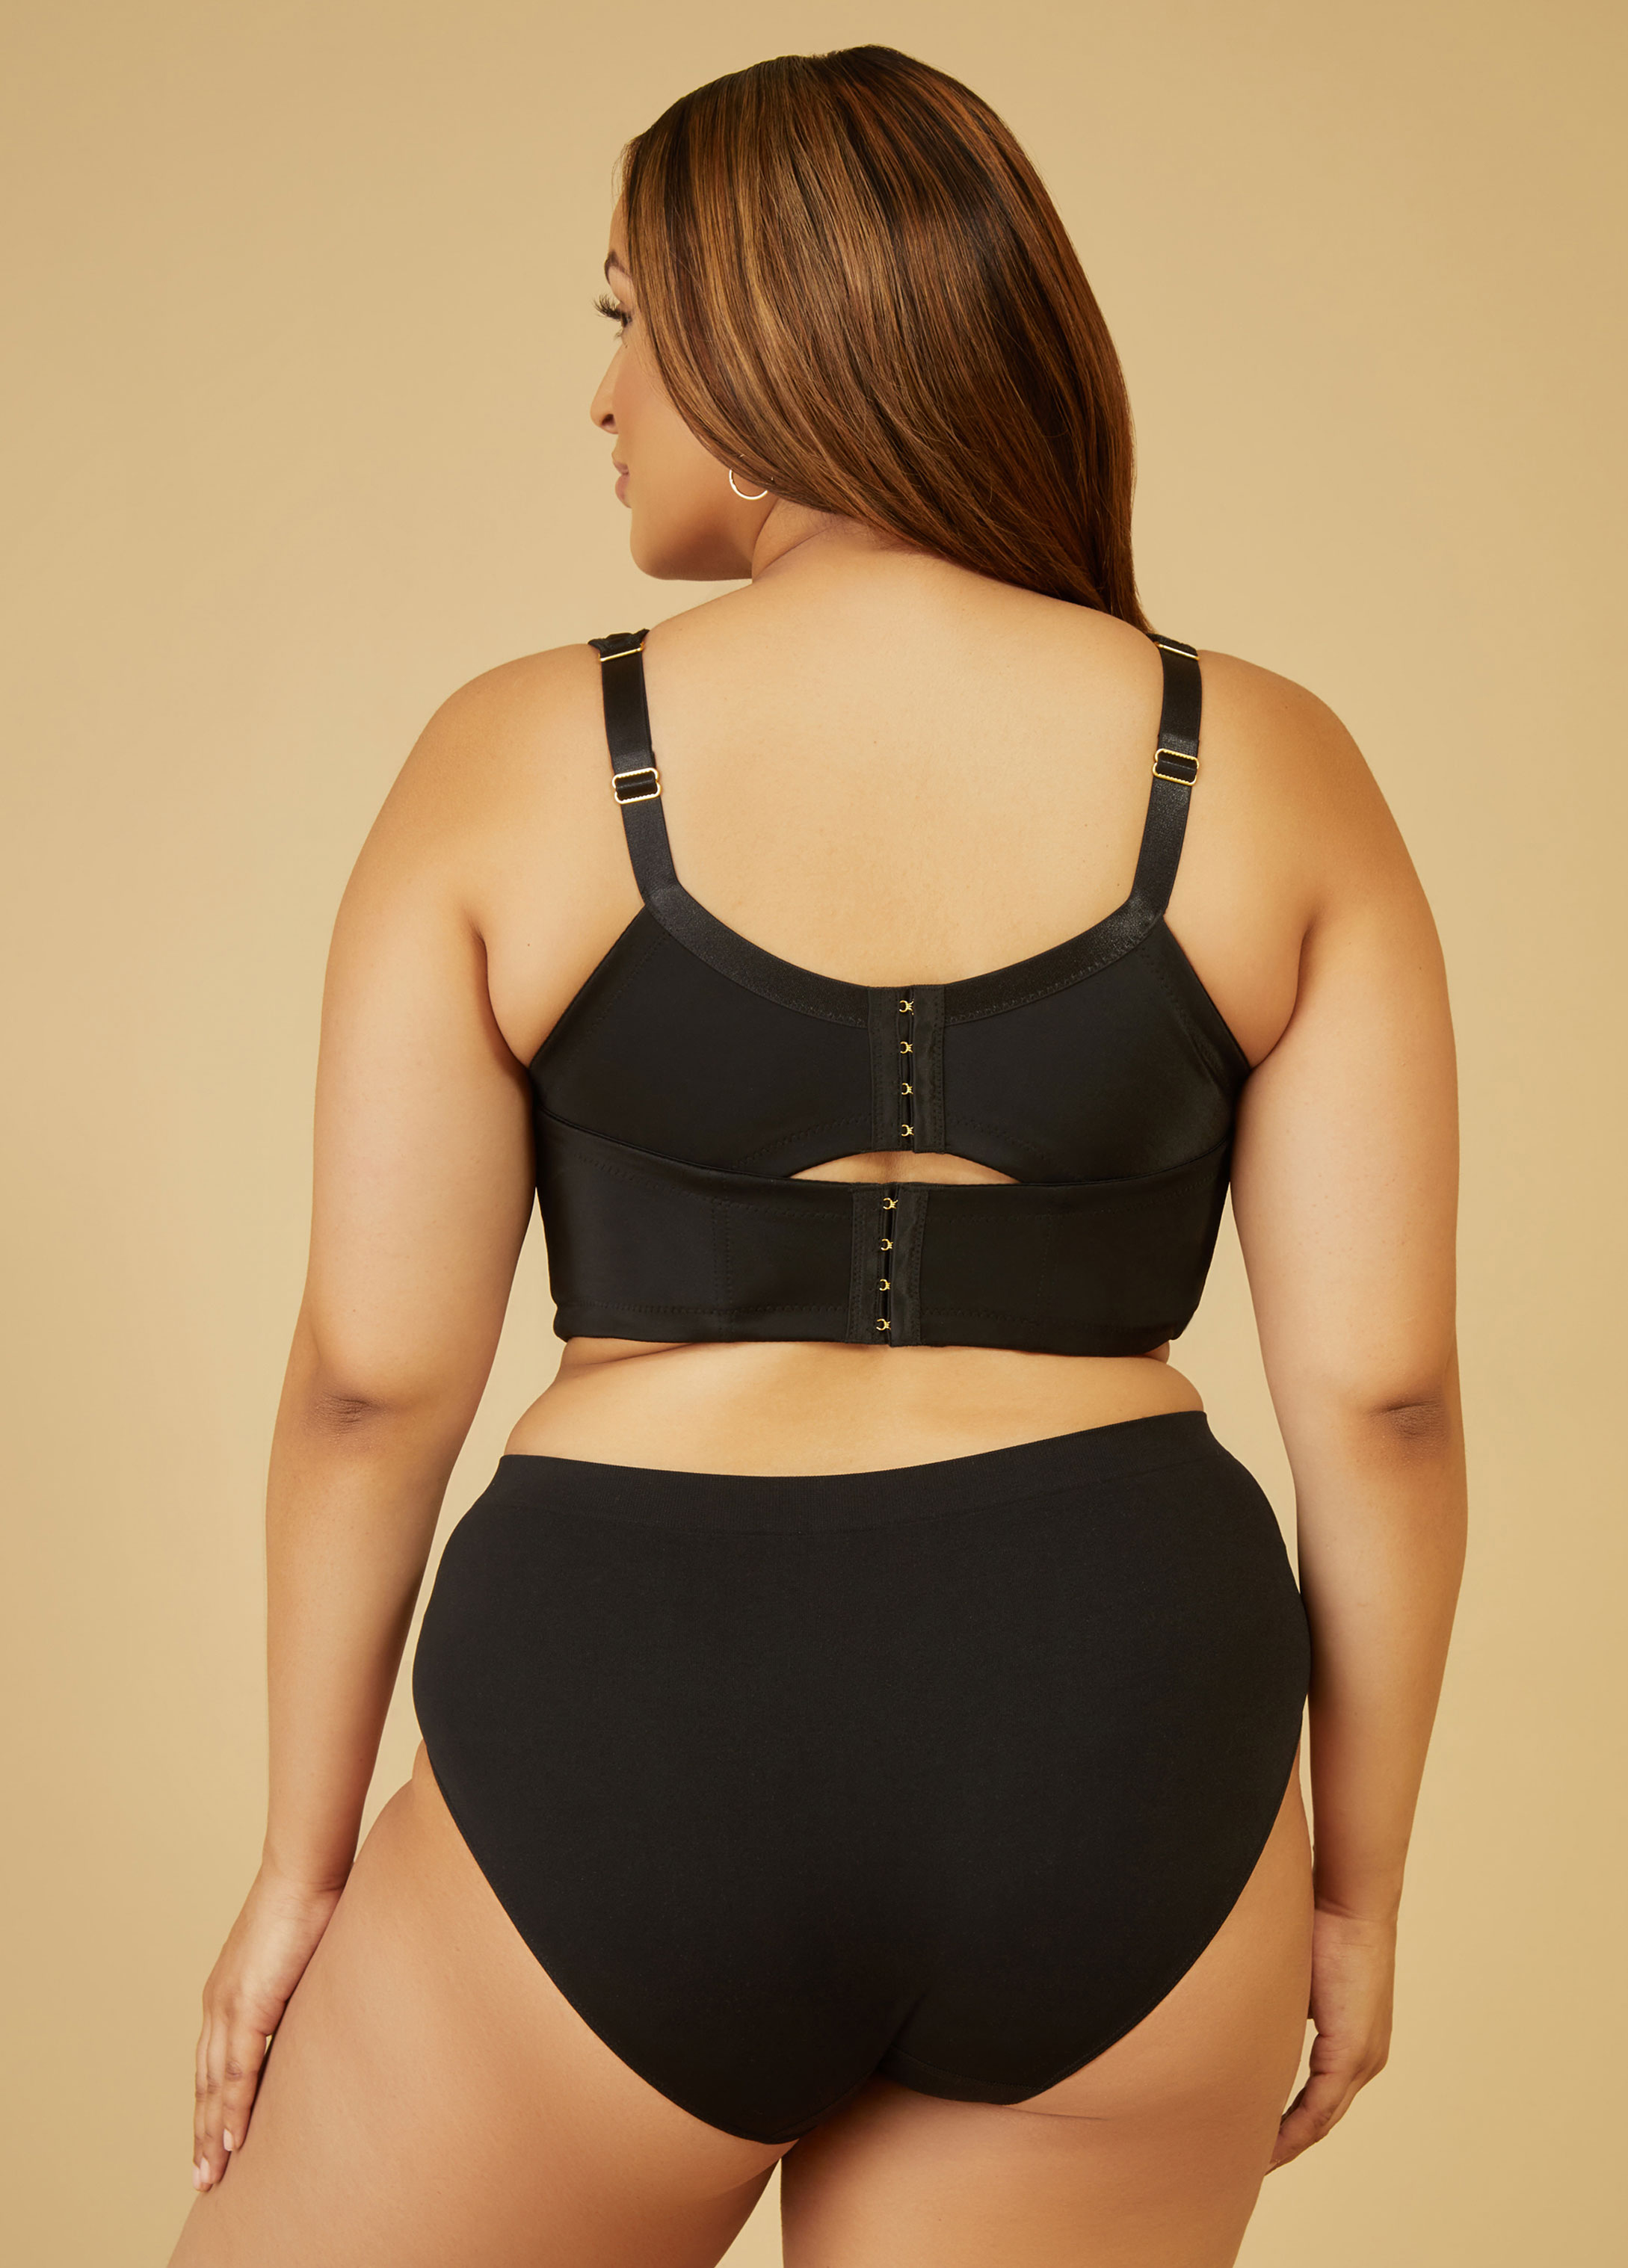 Sky Mall Barbados - AVAILABLE NOW FROM Secrexx! This Ashley Stewart  butterfly full coverage bra and its flawless fit makes it our most-loved bra.  The double-back wrap panels conform to your curves